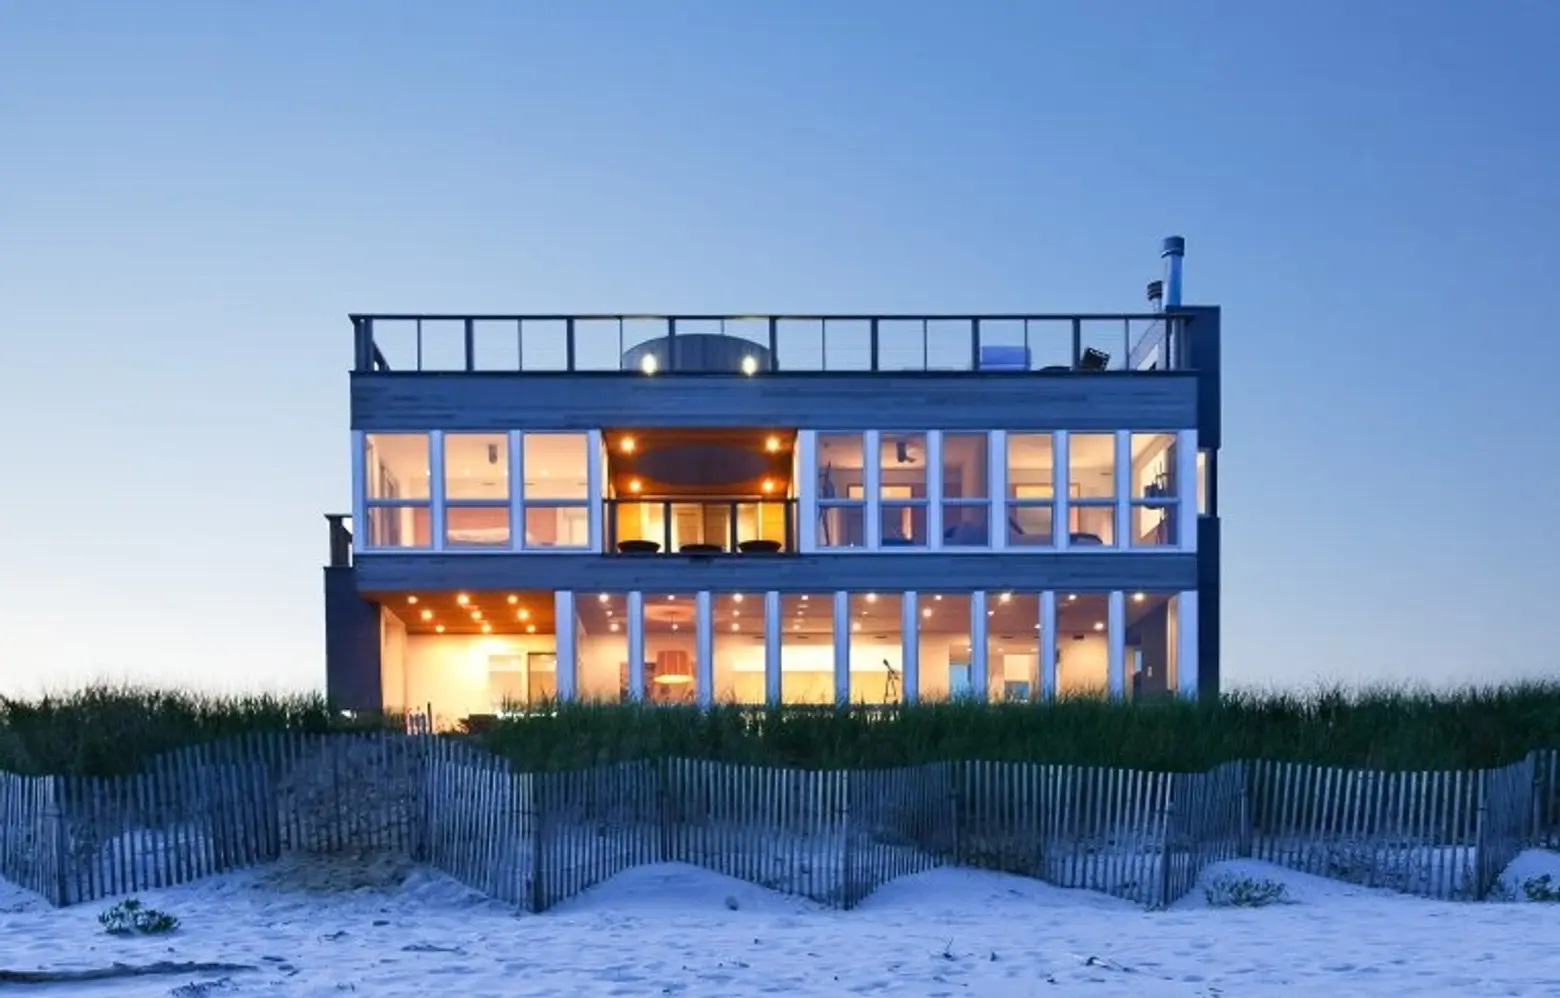 Dune Road Beach House designed by Resolution: 4 Architecture